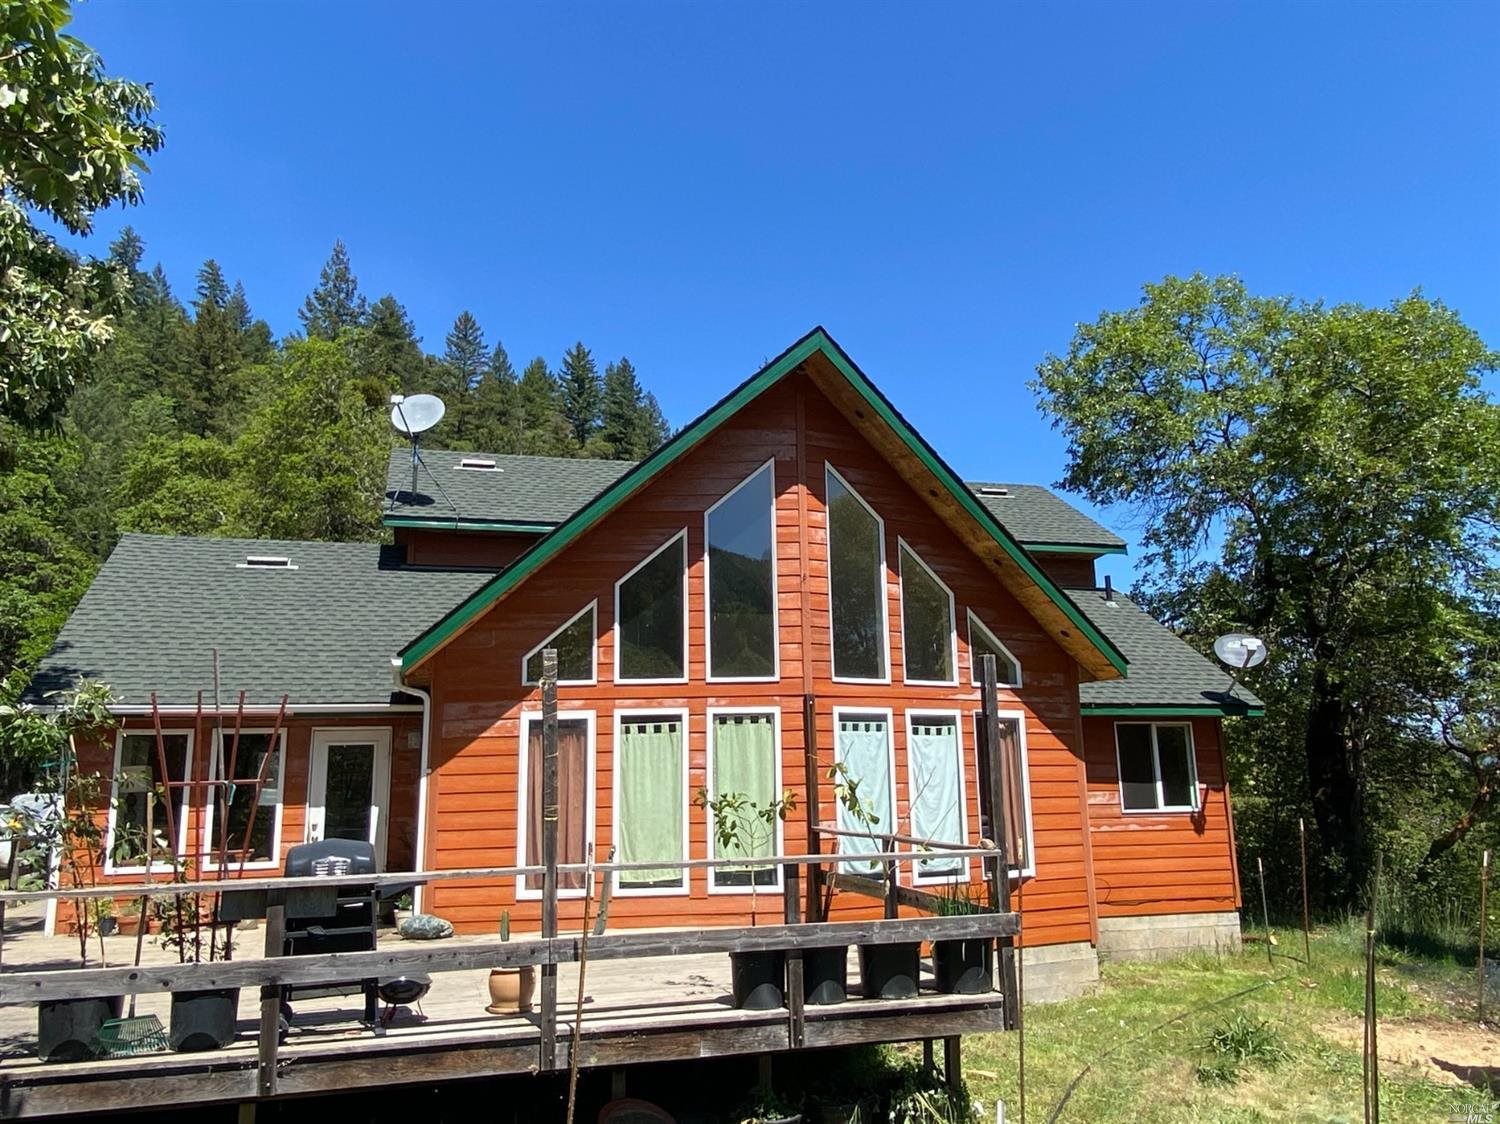 Photo of 8400 Simmerly Rd in Laytonville, CA